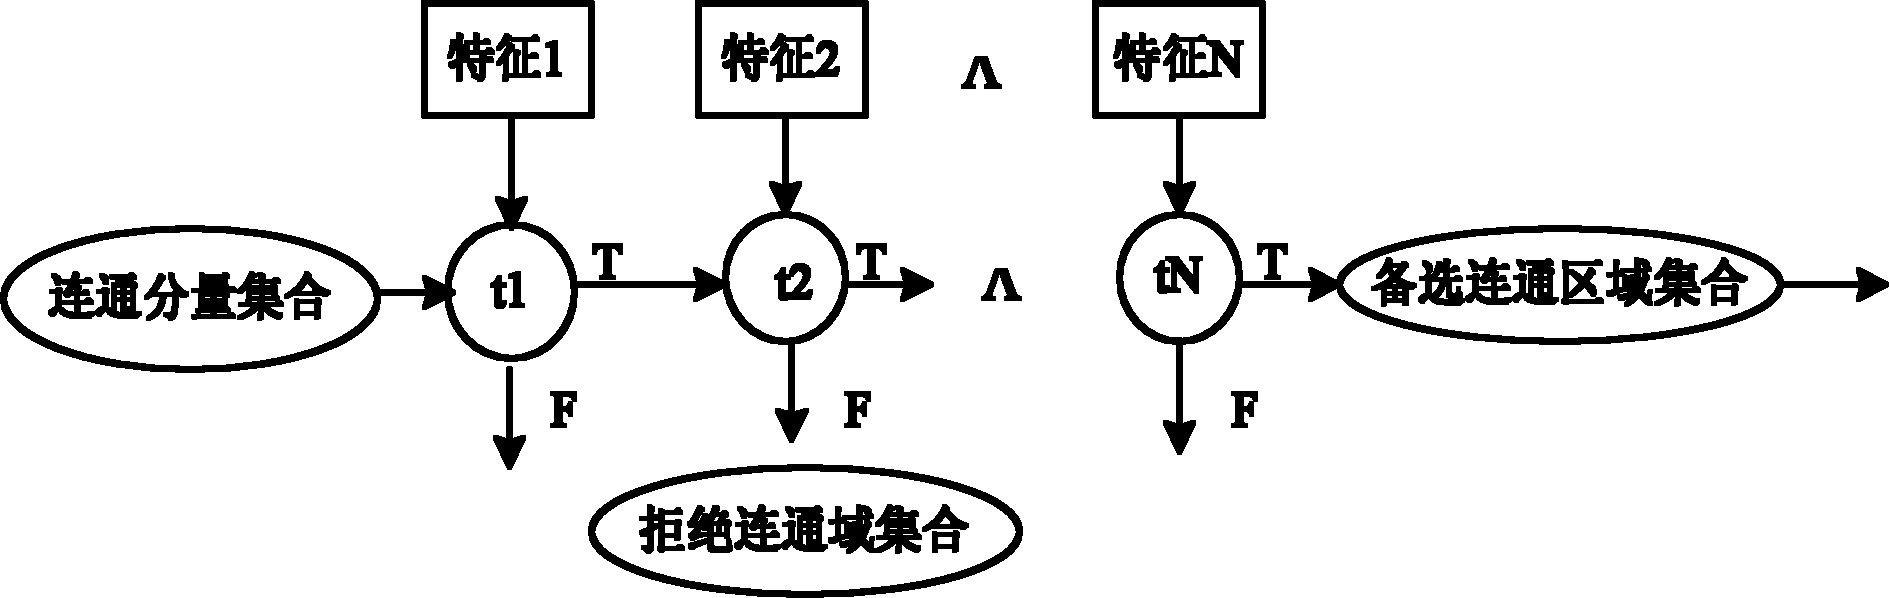 Chinese environment-oriented complex scene text positioning method